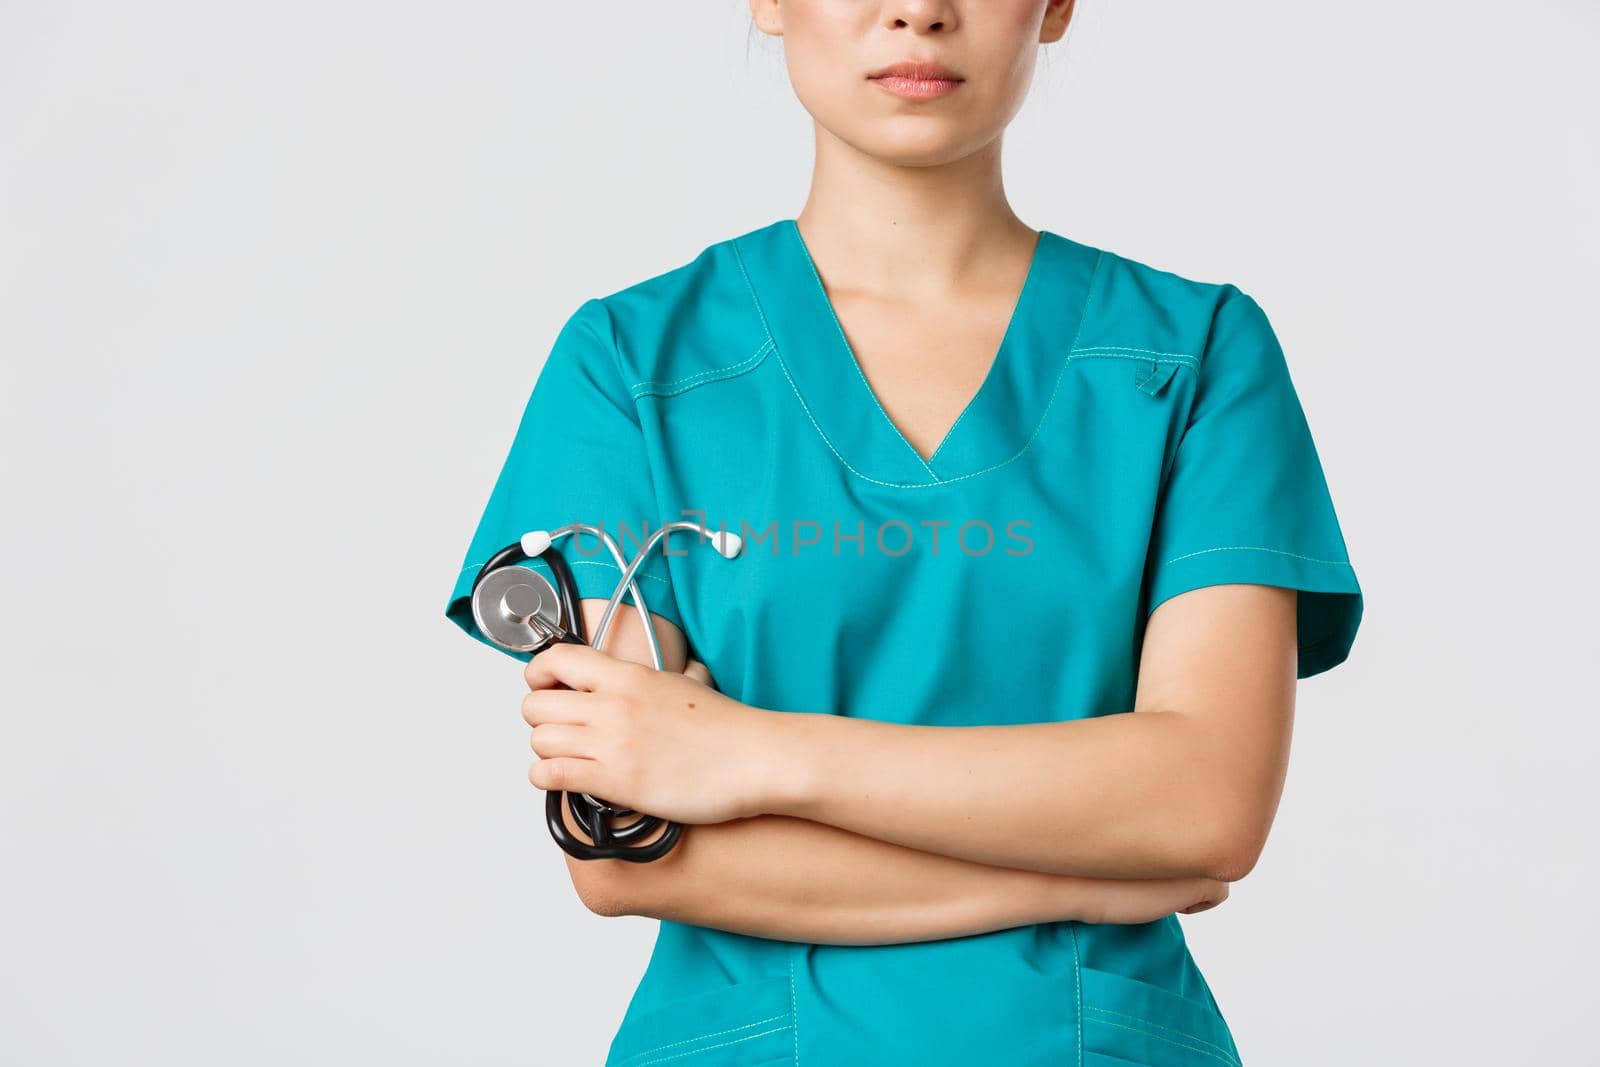 Covid-19, coronavirus disease, healthcare workers concept. Close-up of confident female asian physician, doctor in medical scrubs, cross arms determined and holding stethoscope, white background.